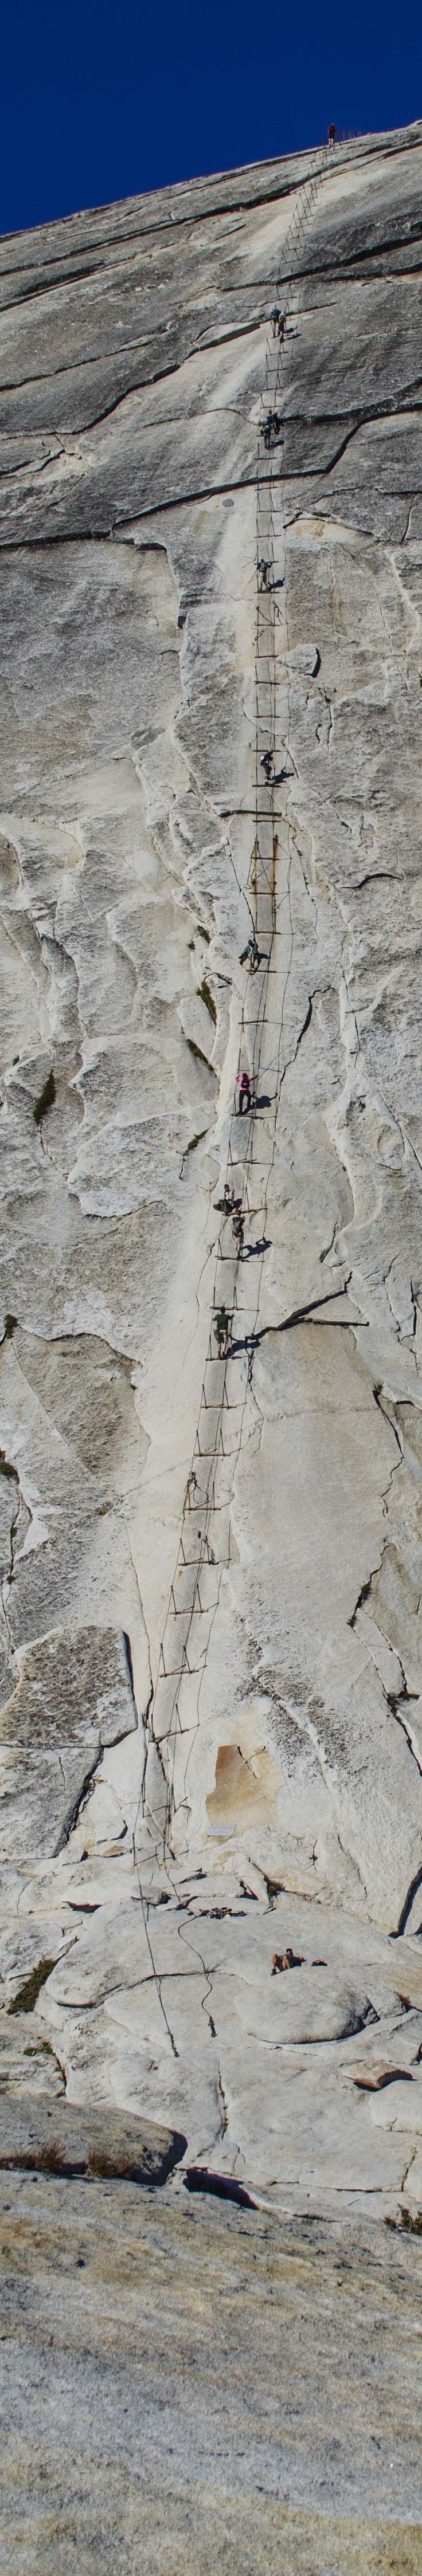 Hikers on the Half Dome cables.